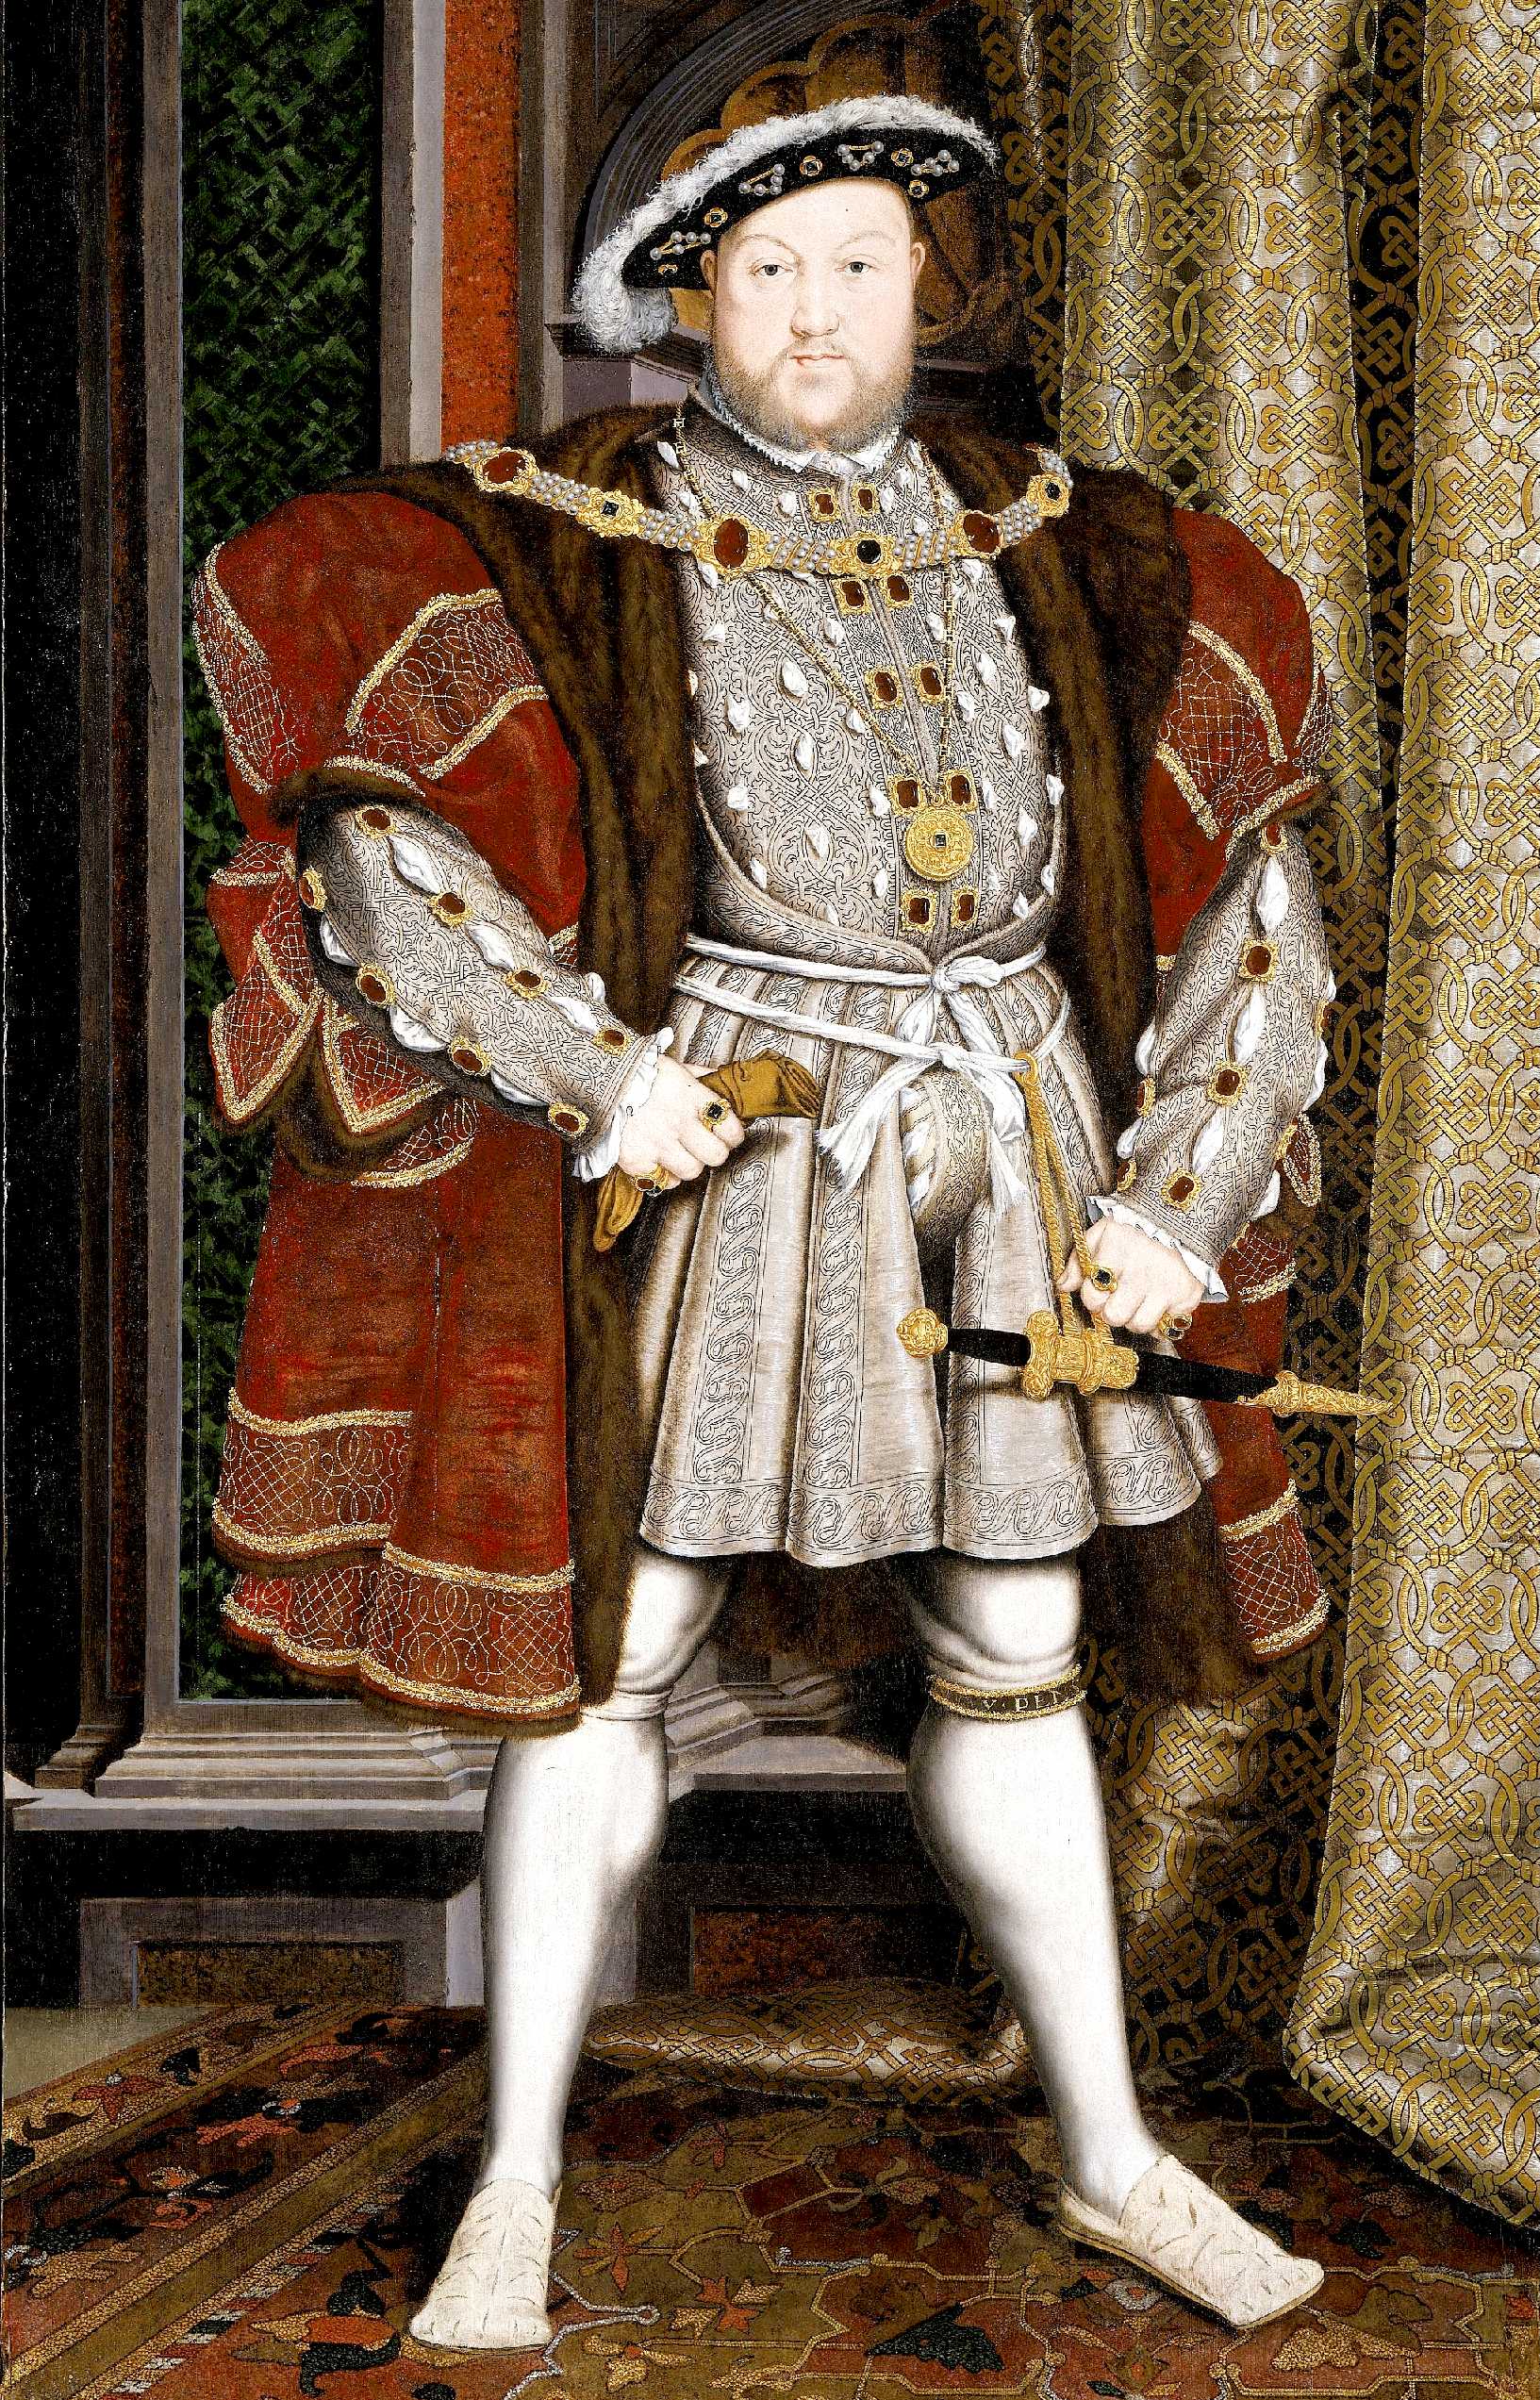 Portrait of the Butcher King, Henry VIII lopped heads at the rate of 30 a week